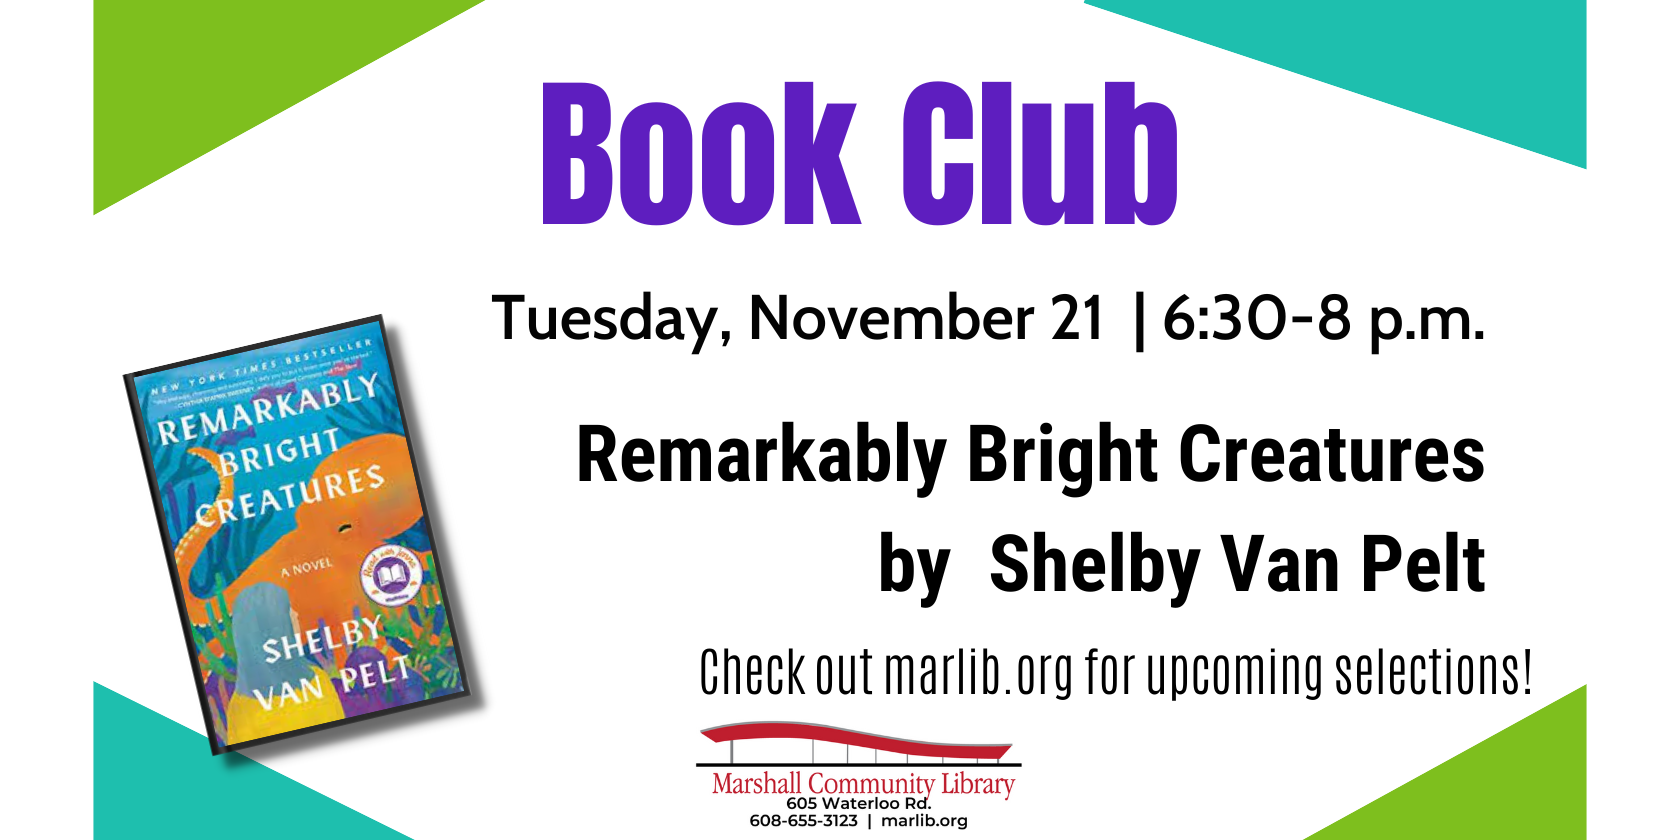 November Book Club - Remarkably Bright Creatures by Shelby Van Pelt